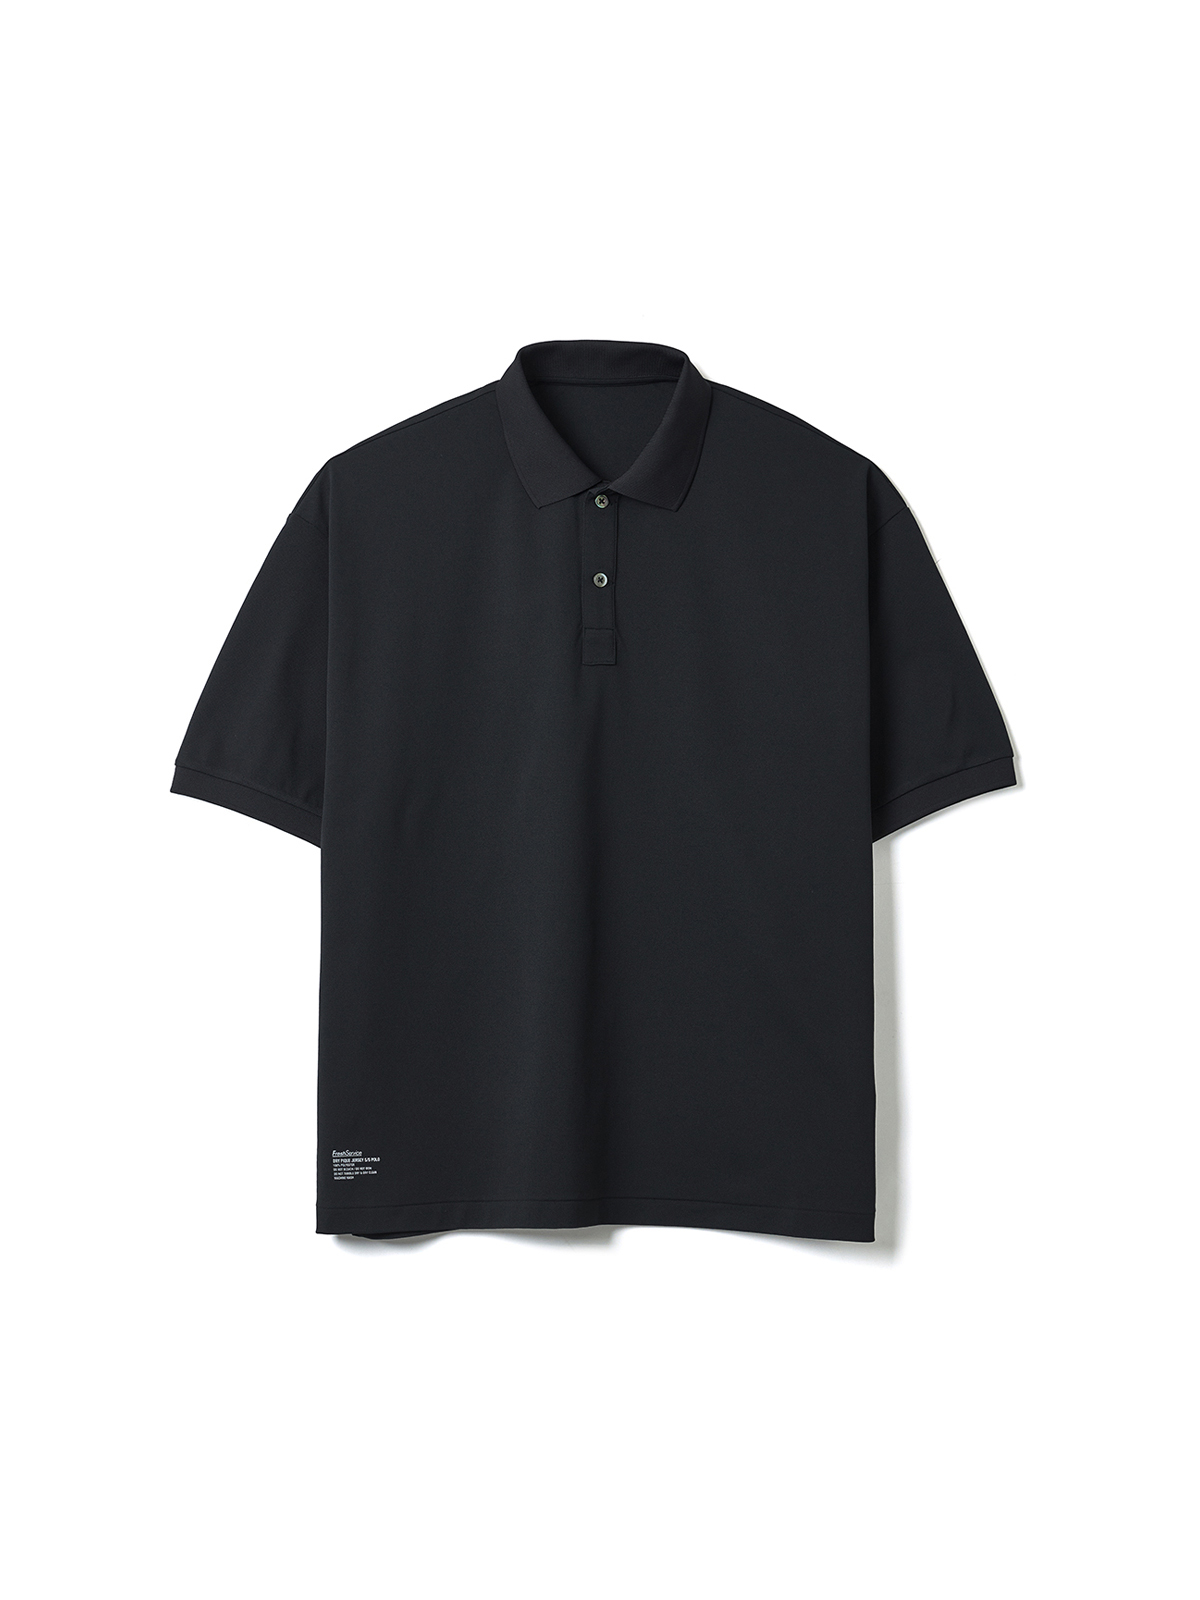 DRY PIQUE JERSEY S/S POLO (BLACK)